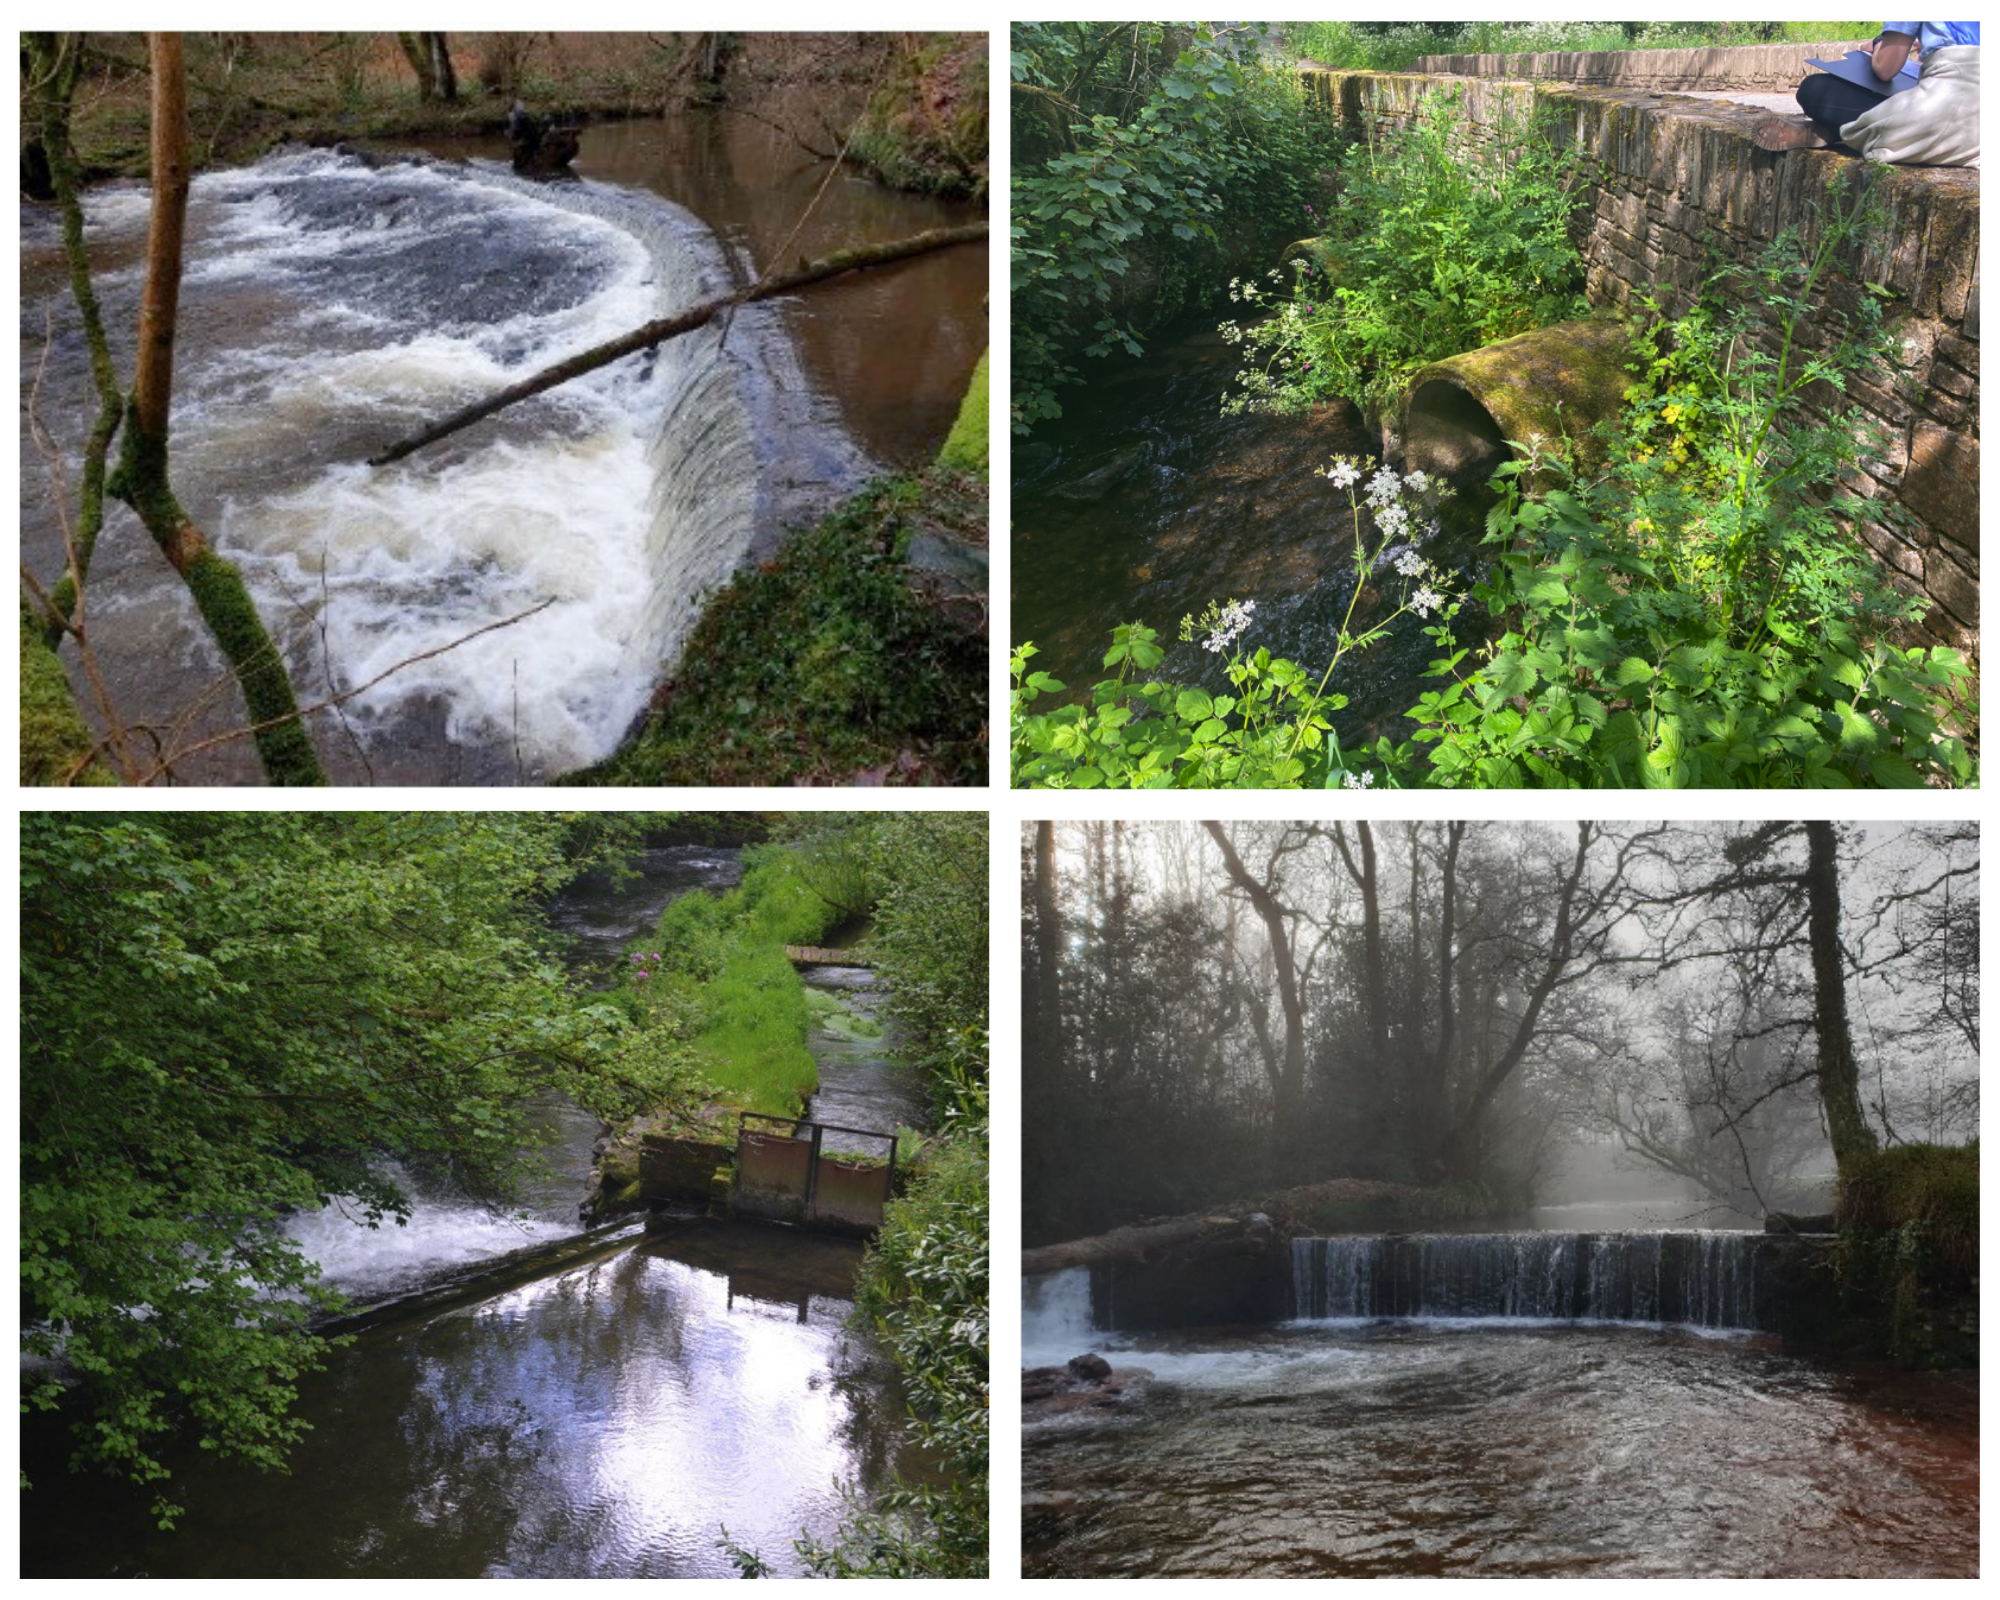 Lottery Fund Awards Half a Million Pounds to Restore Welsh Rivers!